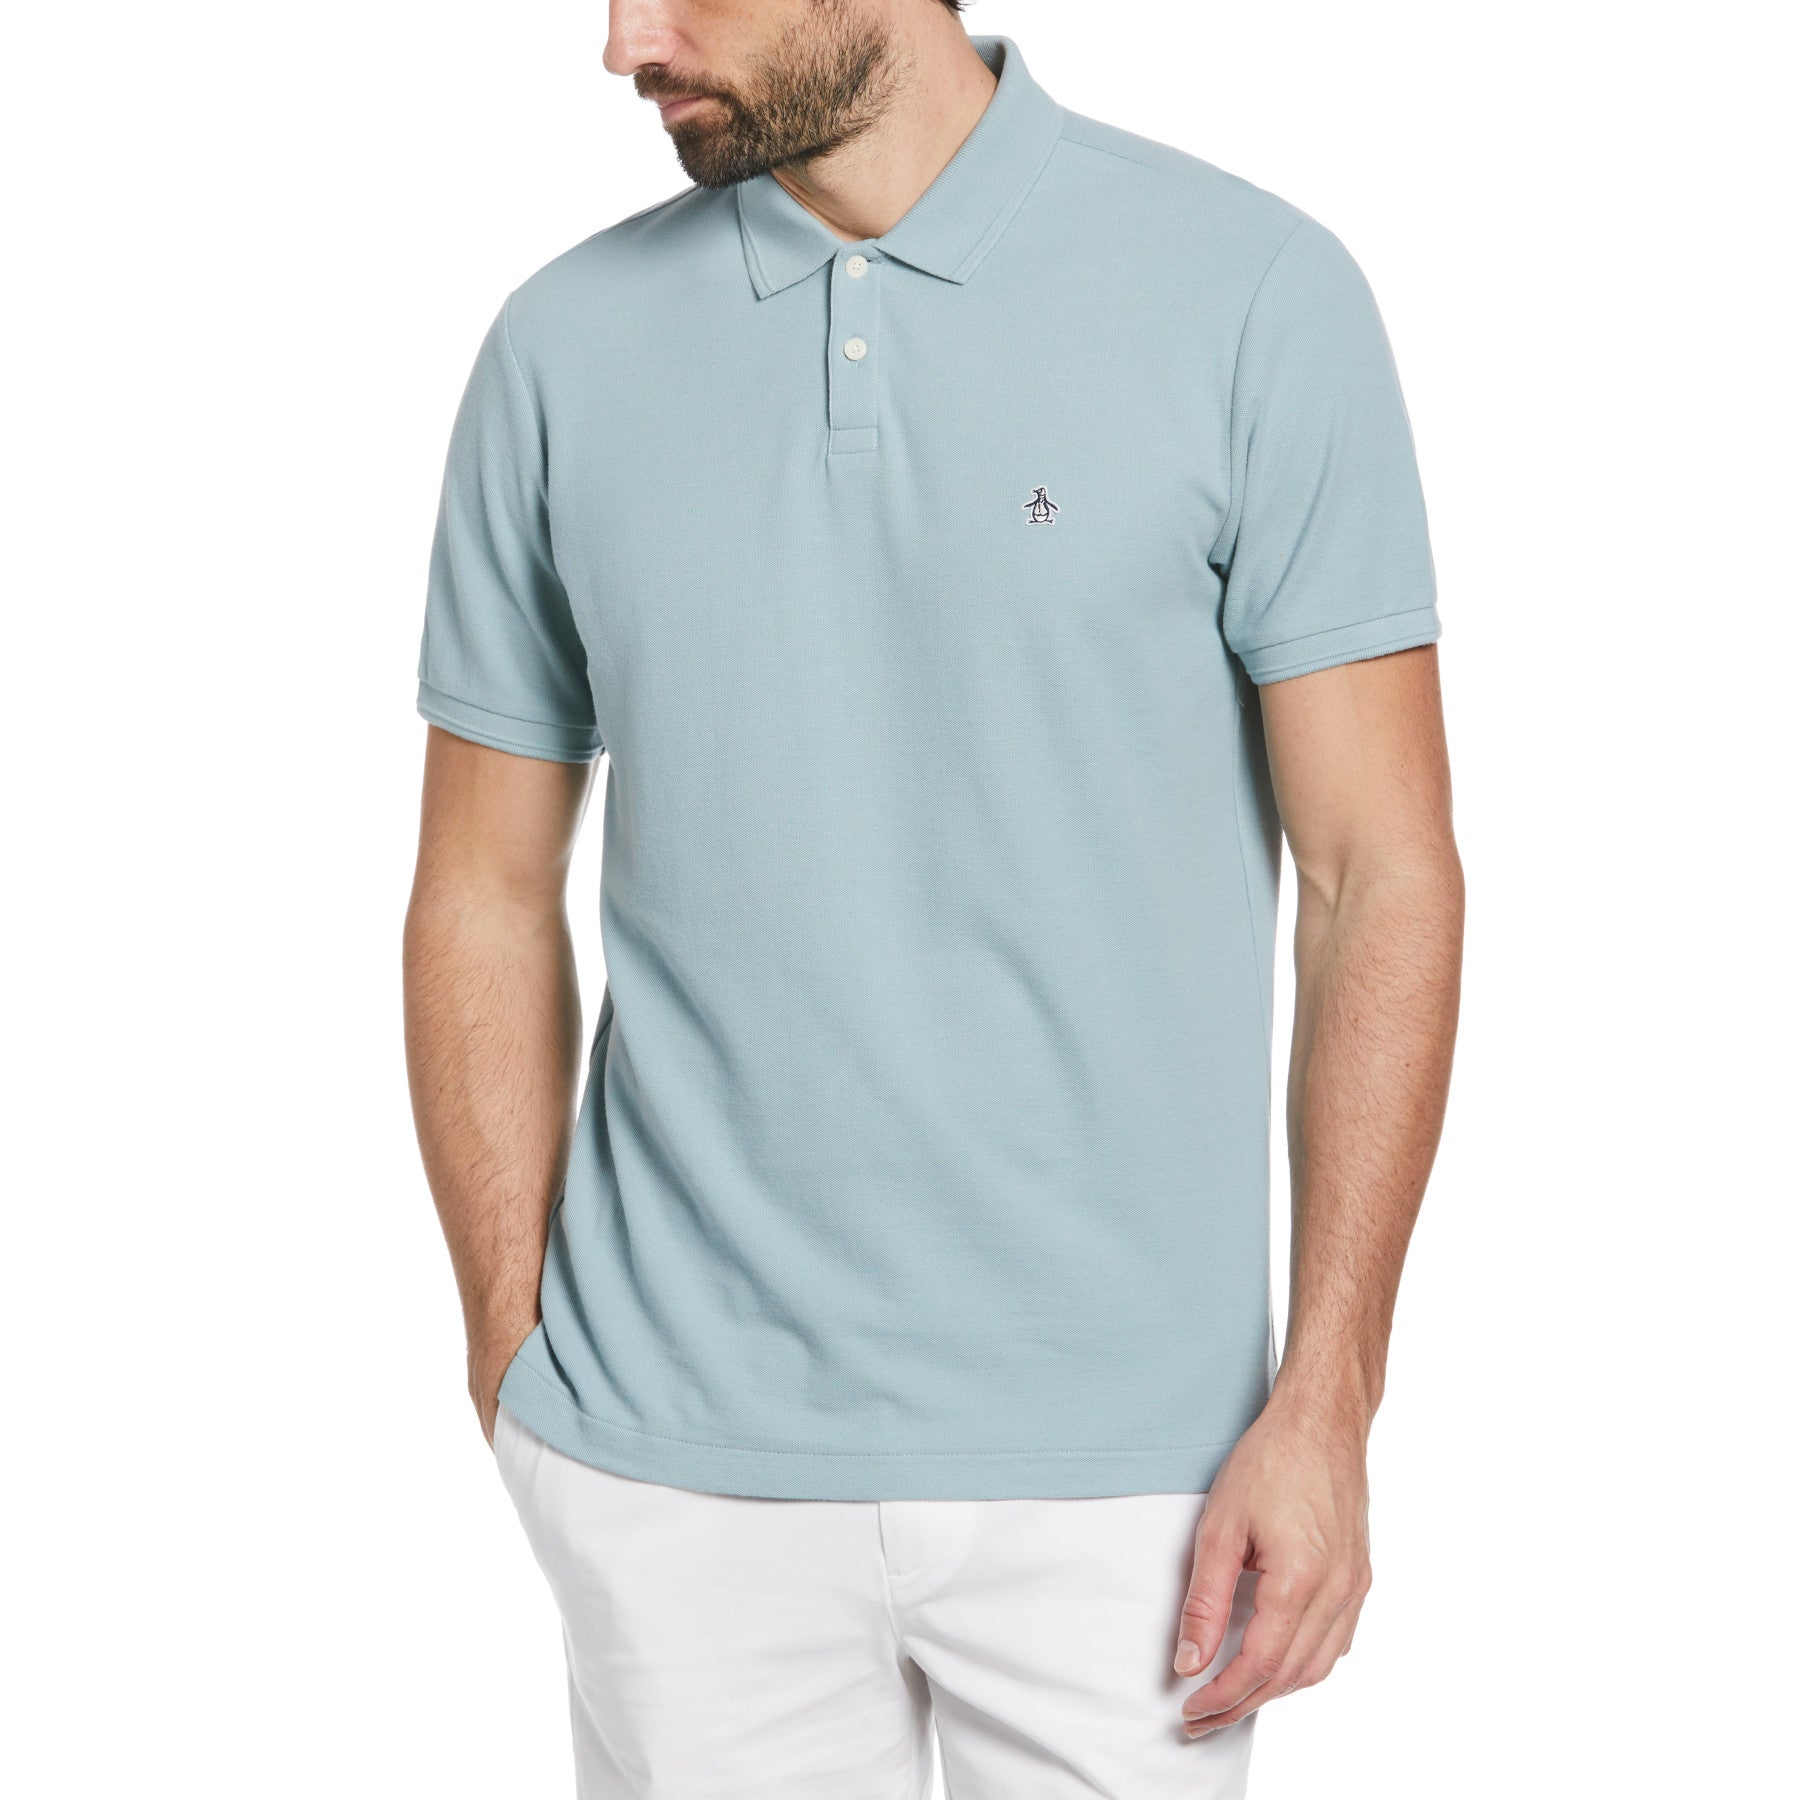 View Sticker Pete Daddy Polo Shirt In Arona information